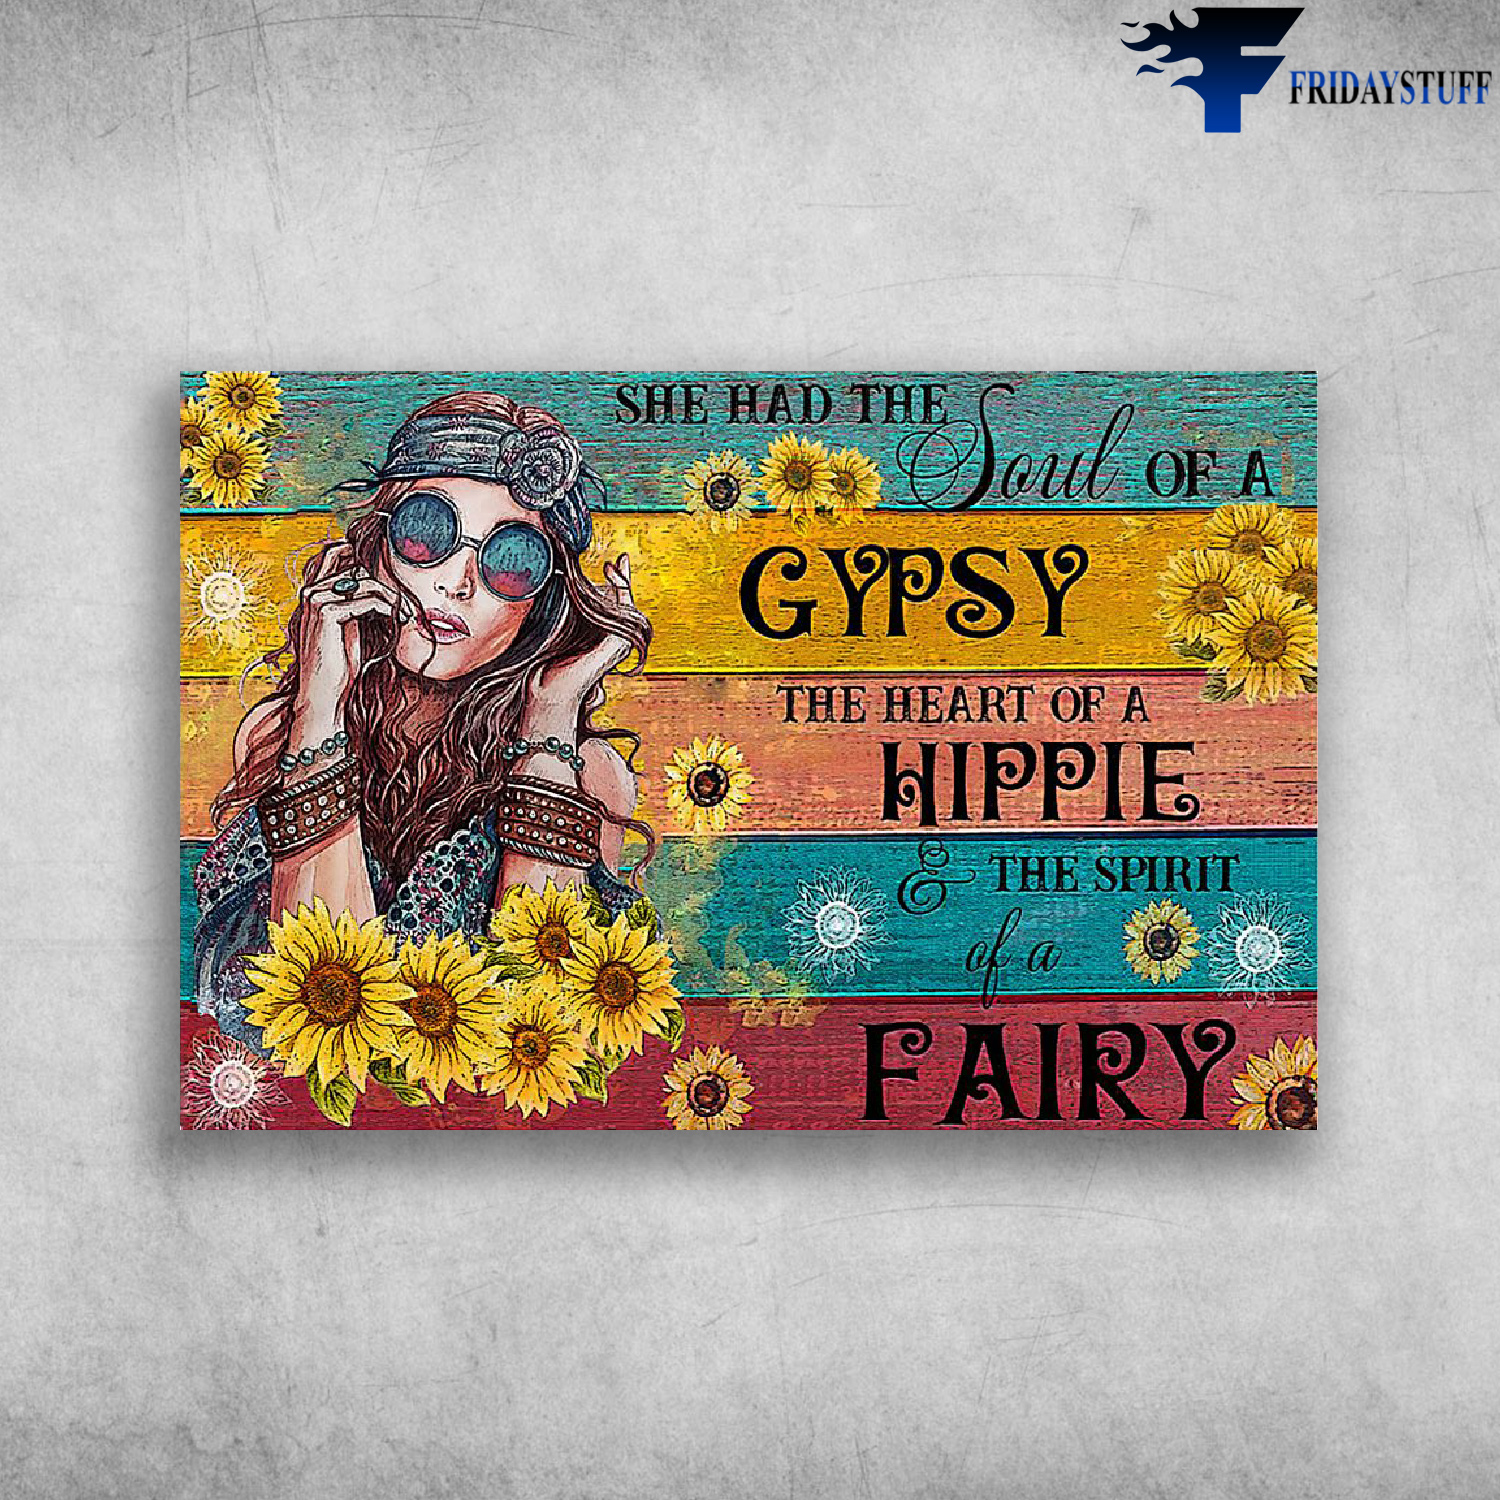 She Had The Soul Of A Gypsy The Heart Of A Hippie The Spirit of a Fairy